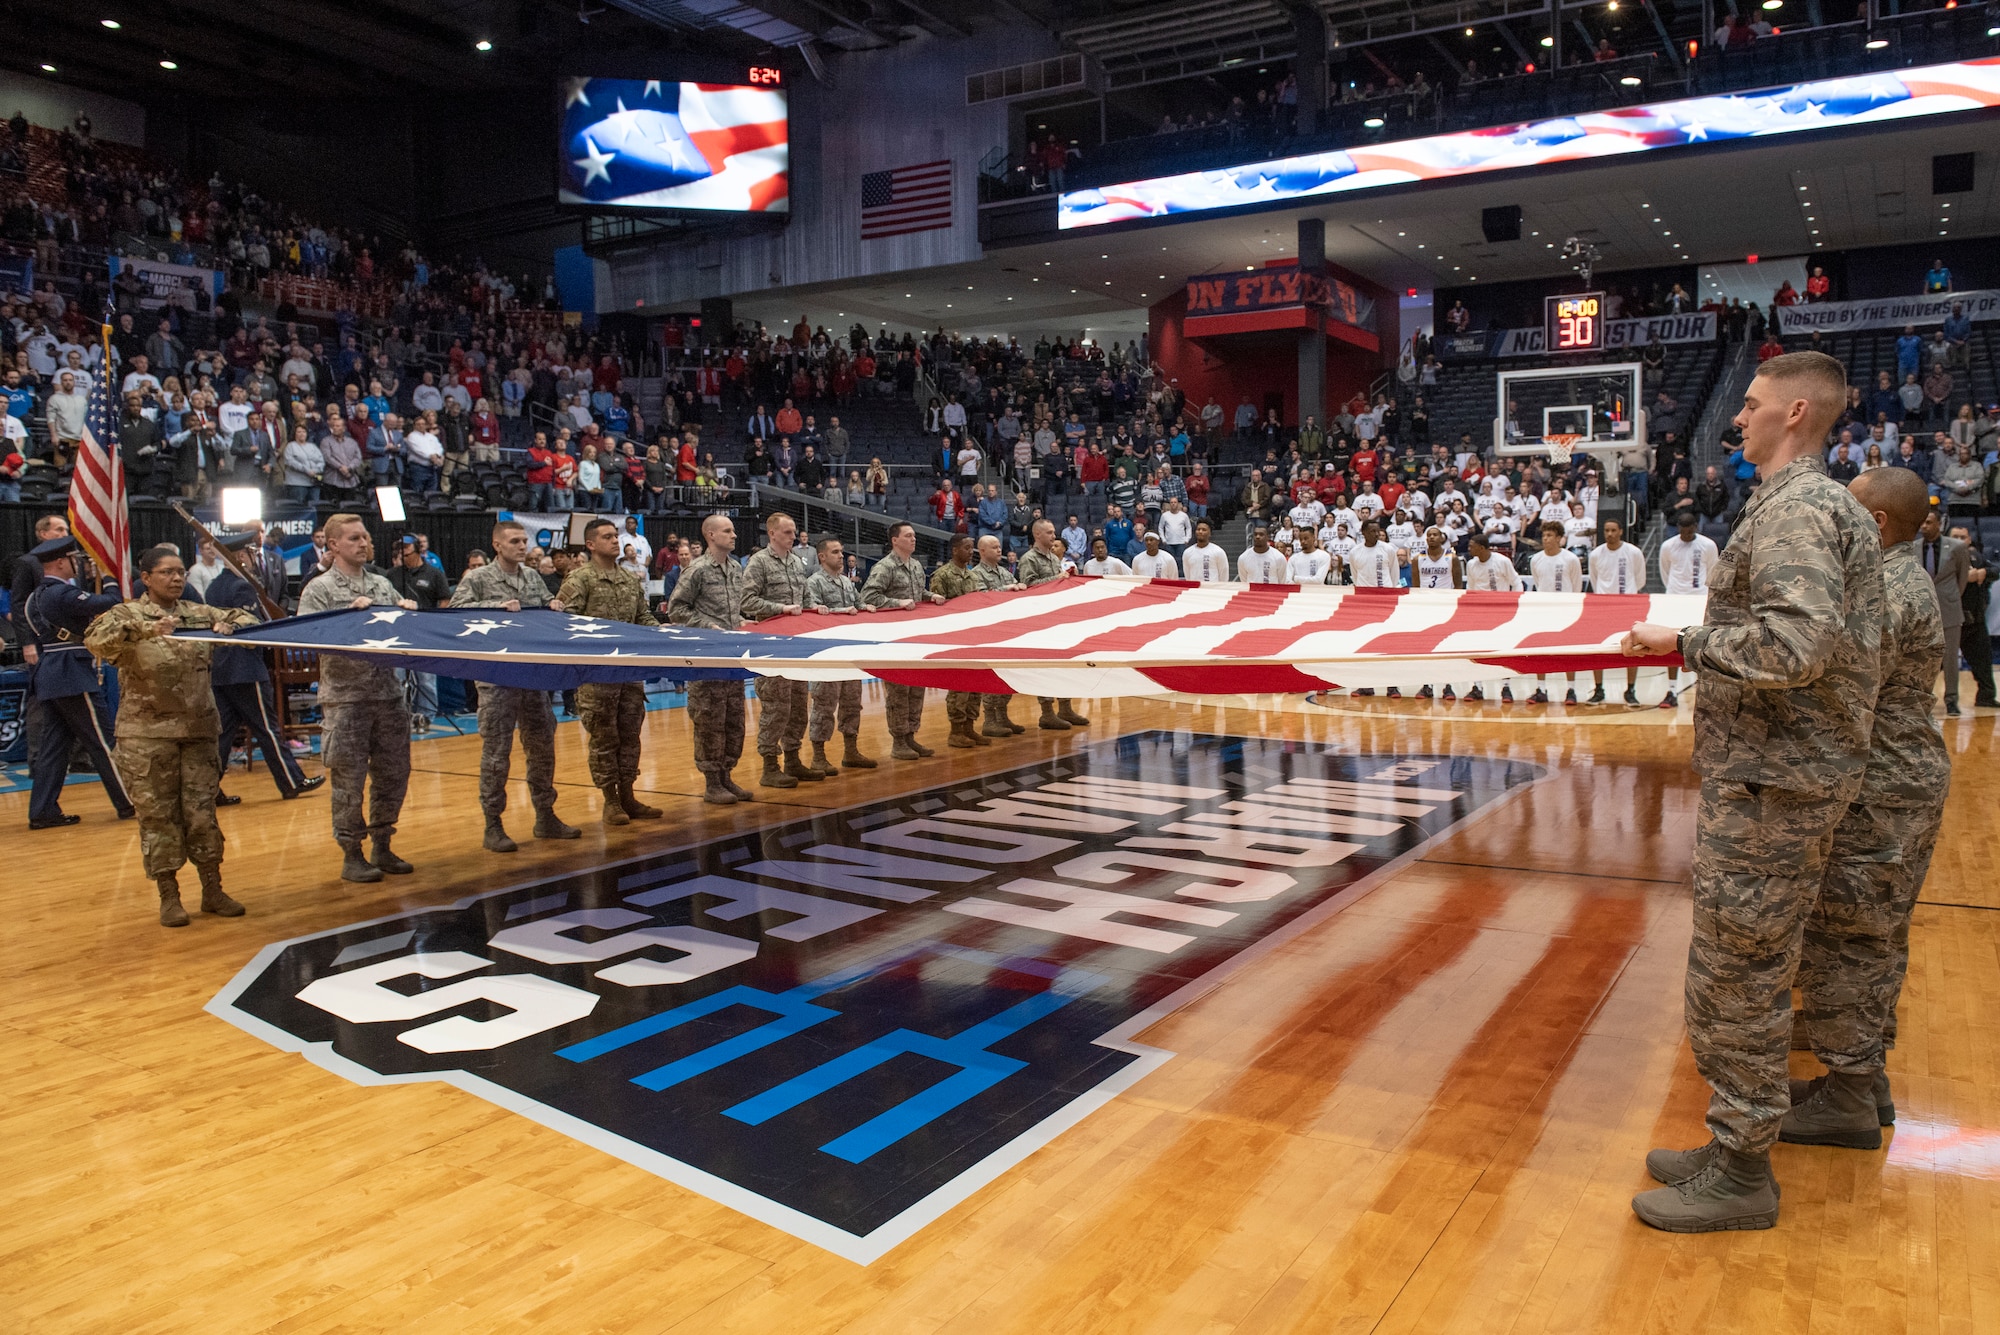 Airmen from Wright-Patterson Air Force Base, Ohio hold a large garrison-size American flag during the presentation of the colors and singing of the national anthem at the NCAA First Four Tournament March 19, 2019. (U.S. Air Force photo by Michelle Gigante)